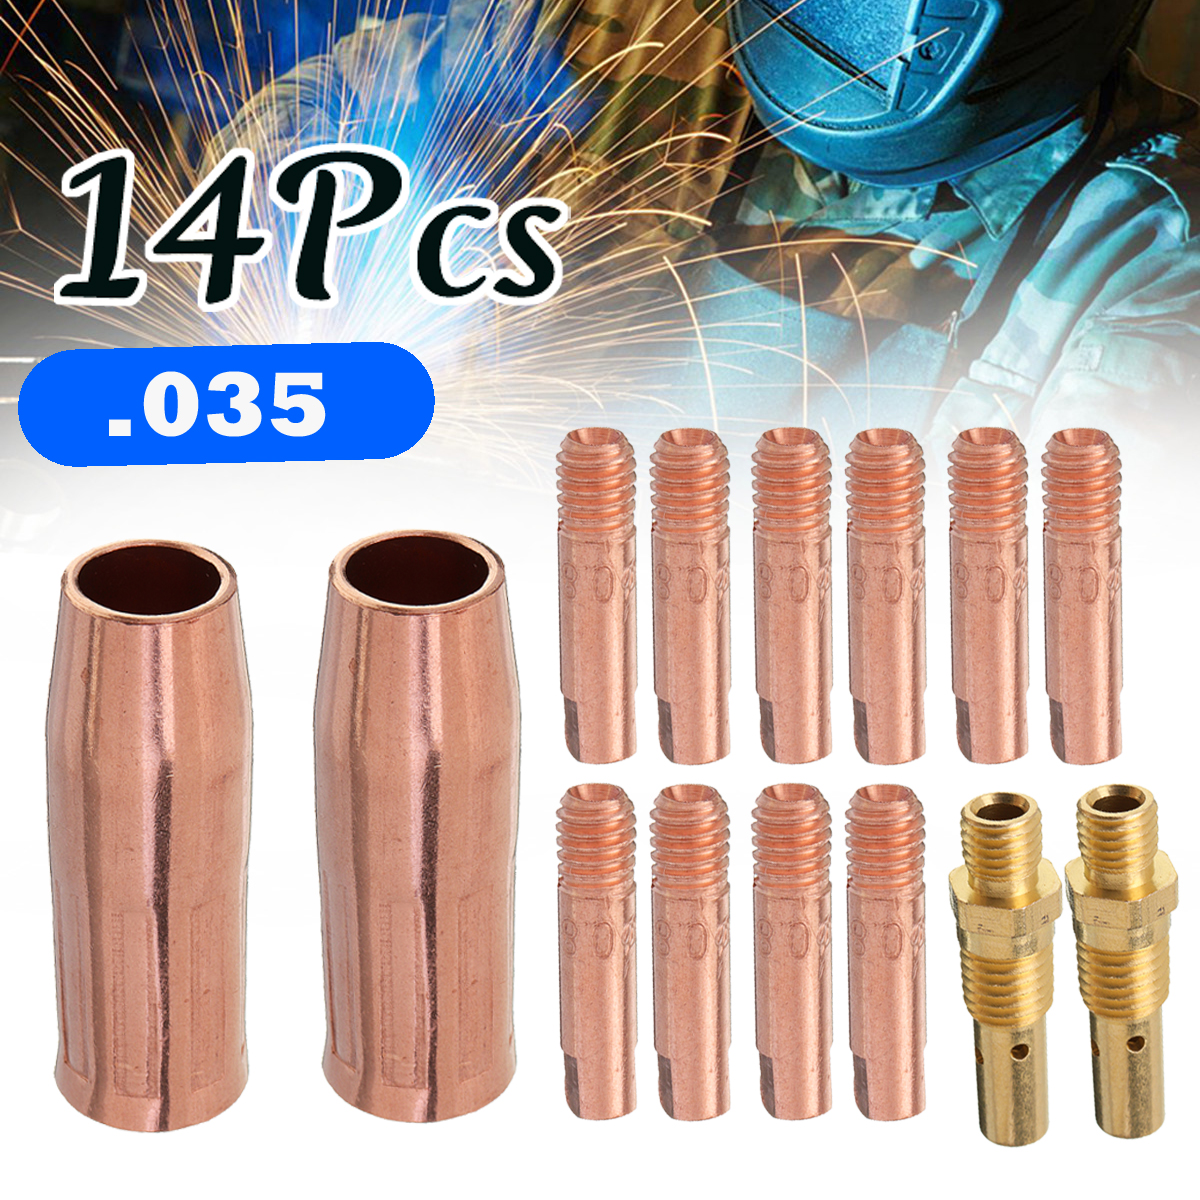 

14Pcs 0.8mm Copper MIG Welding Torch Nozzle Kit for 100L Welding G un for 0.03Inch Contact Tip Gas Nozzle Holder Set + Connecting